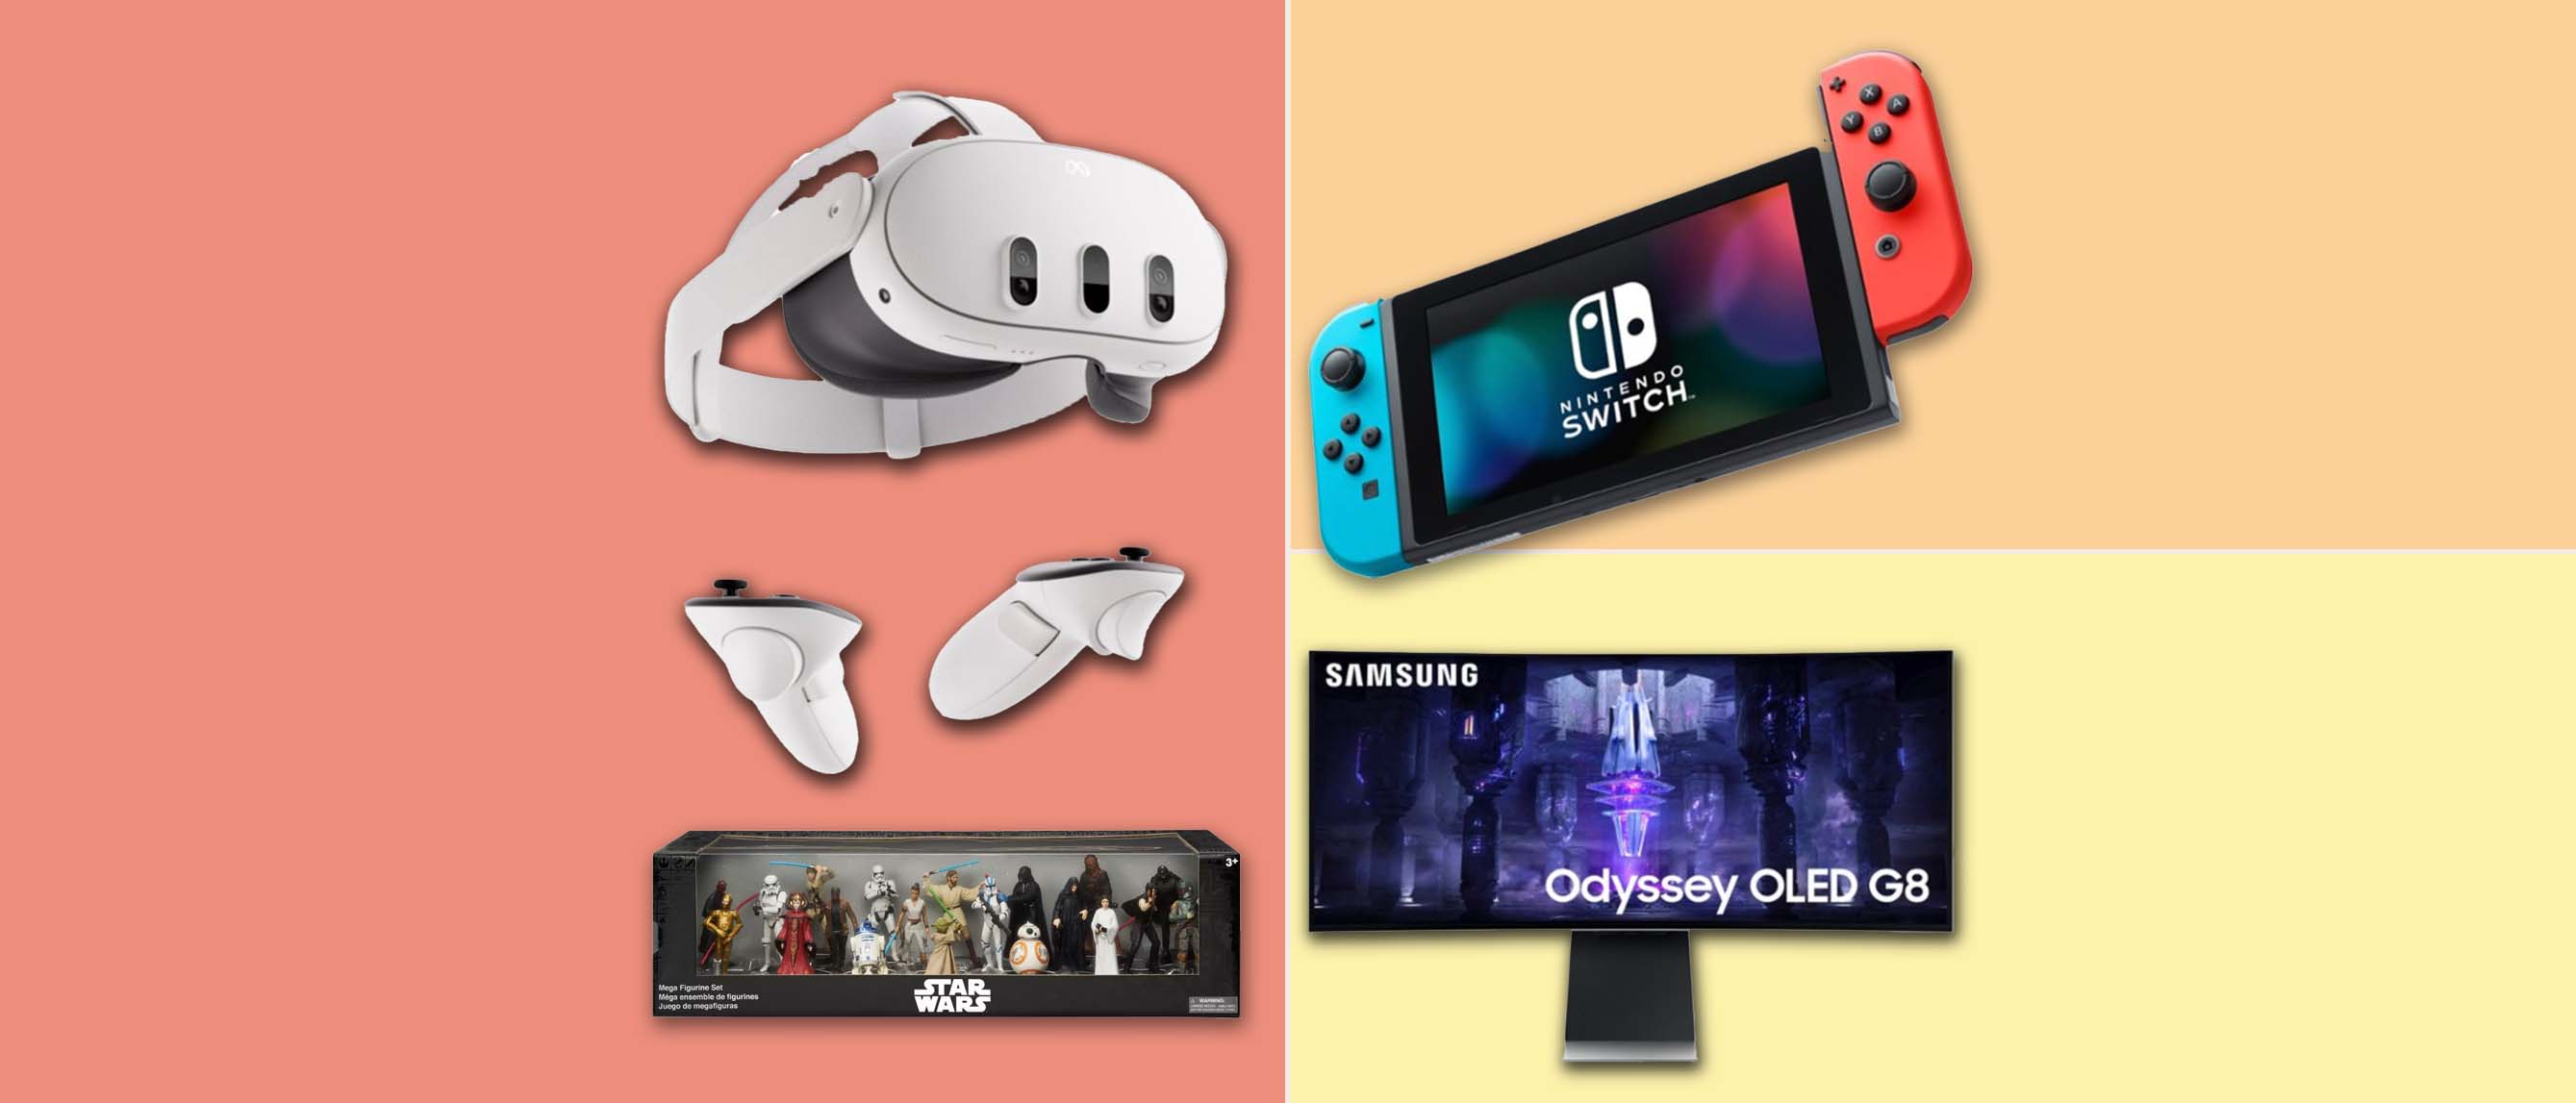 Image of VR device, Samsung monitor, Star Wars figurine and Nintendo Switch